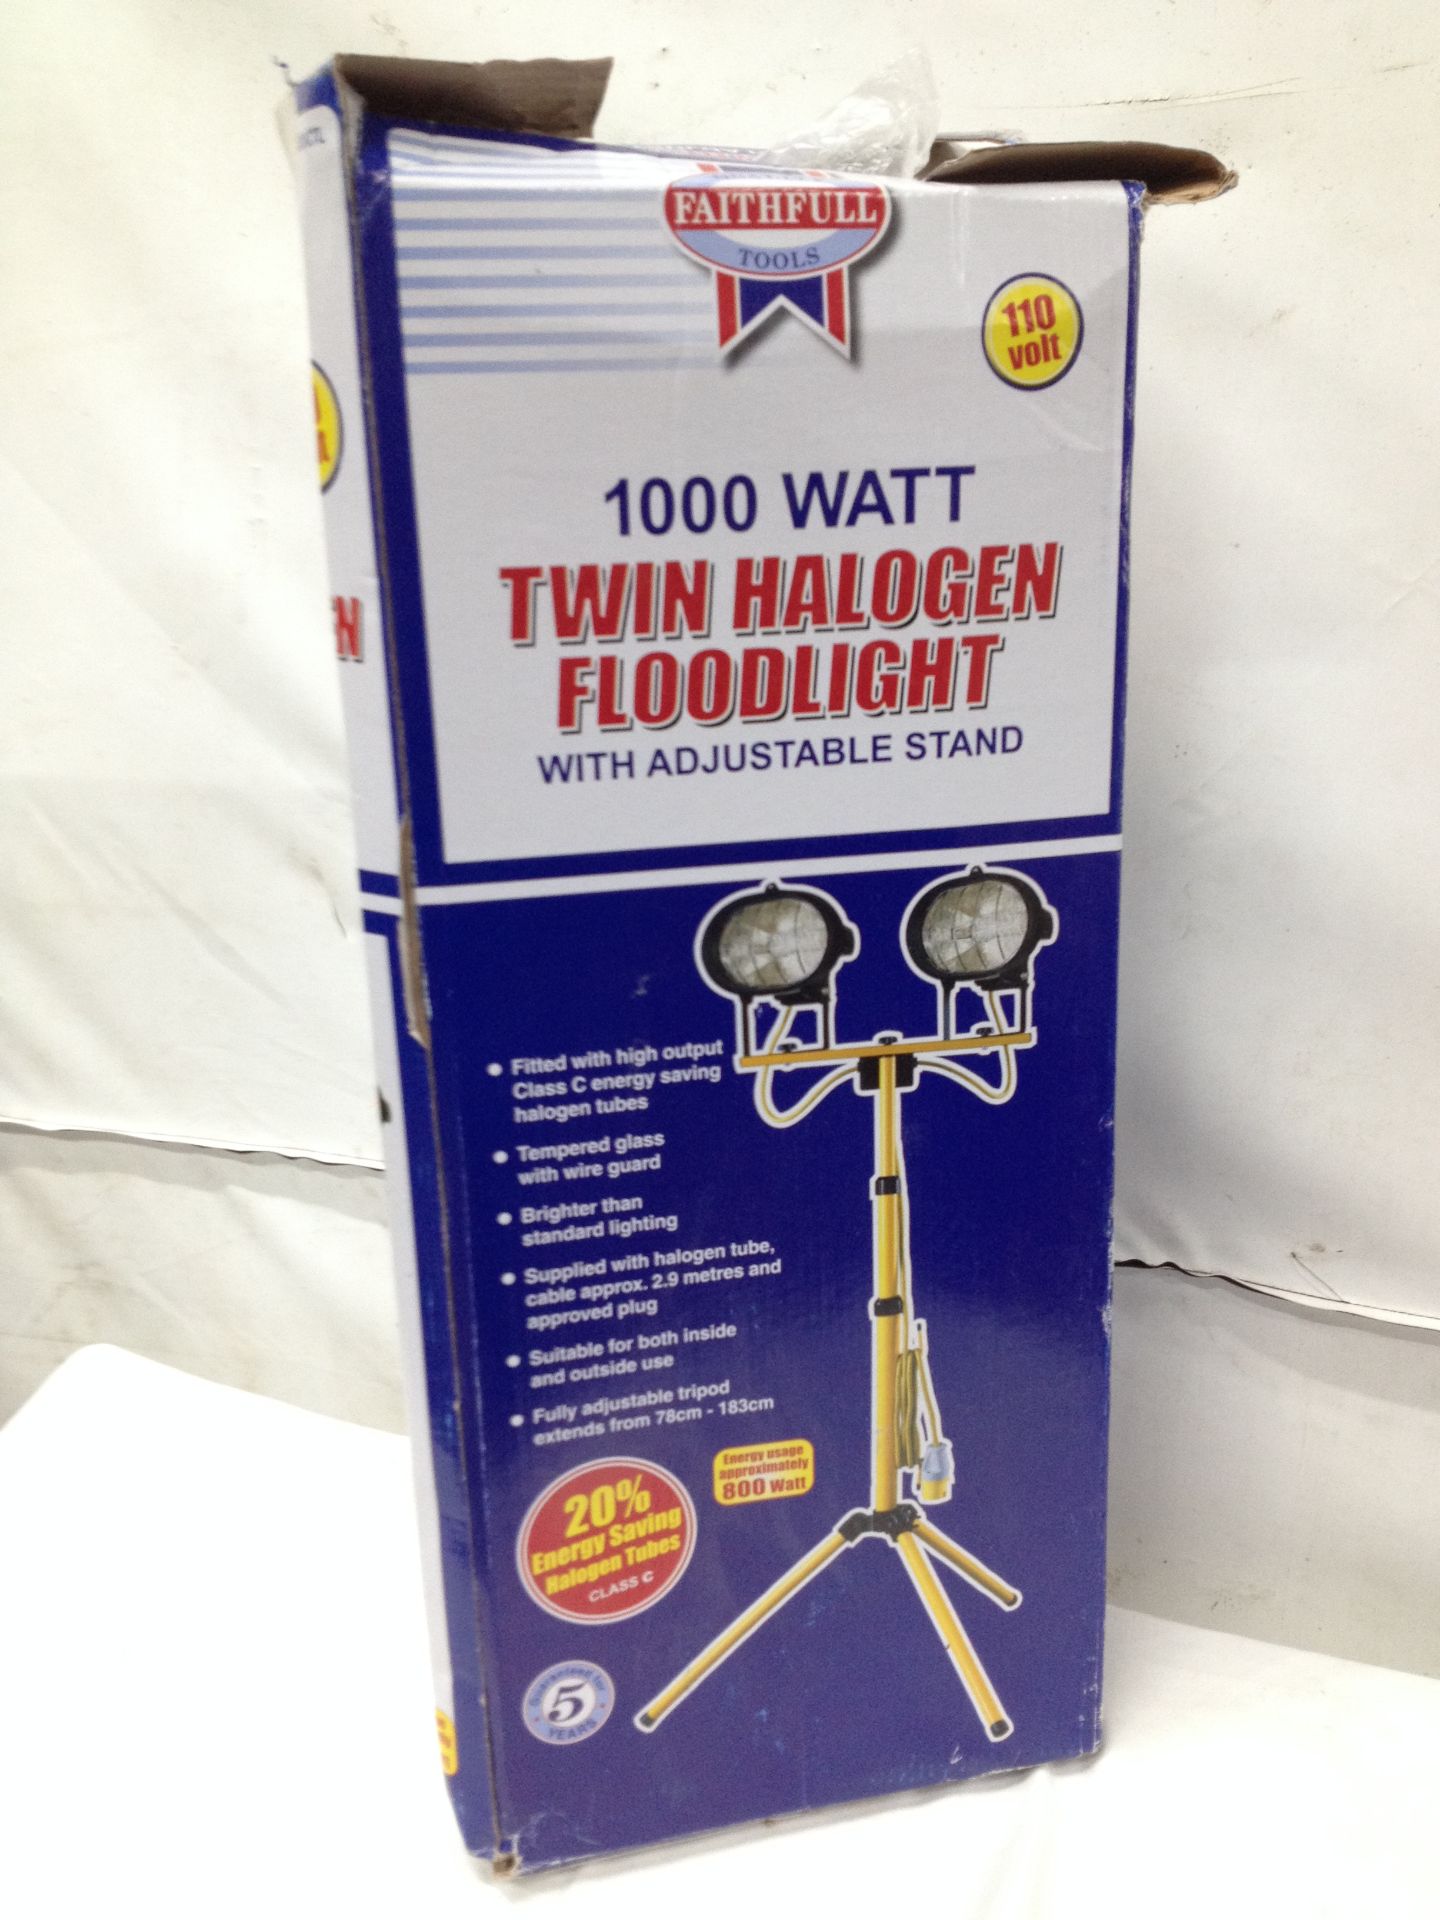 2 x Twin Halogen Floodlight with Adjustable Stand